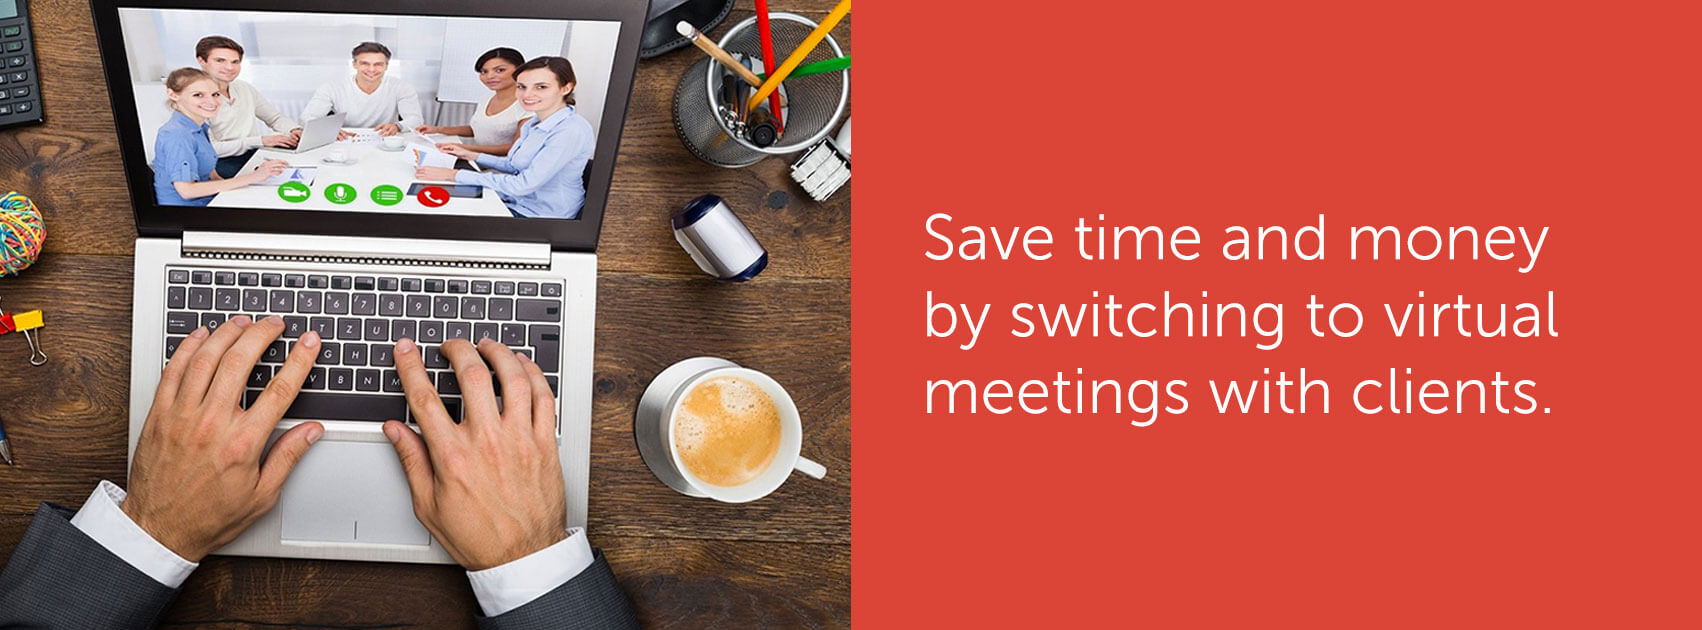 Save Time and Money with Virtual Meetings